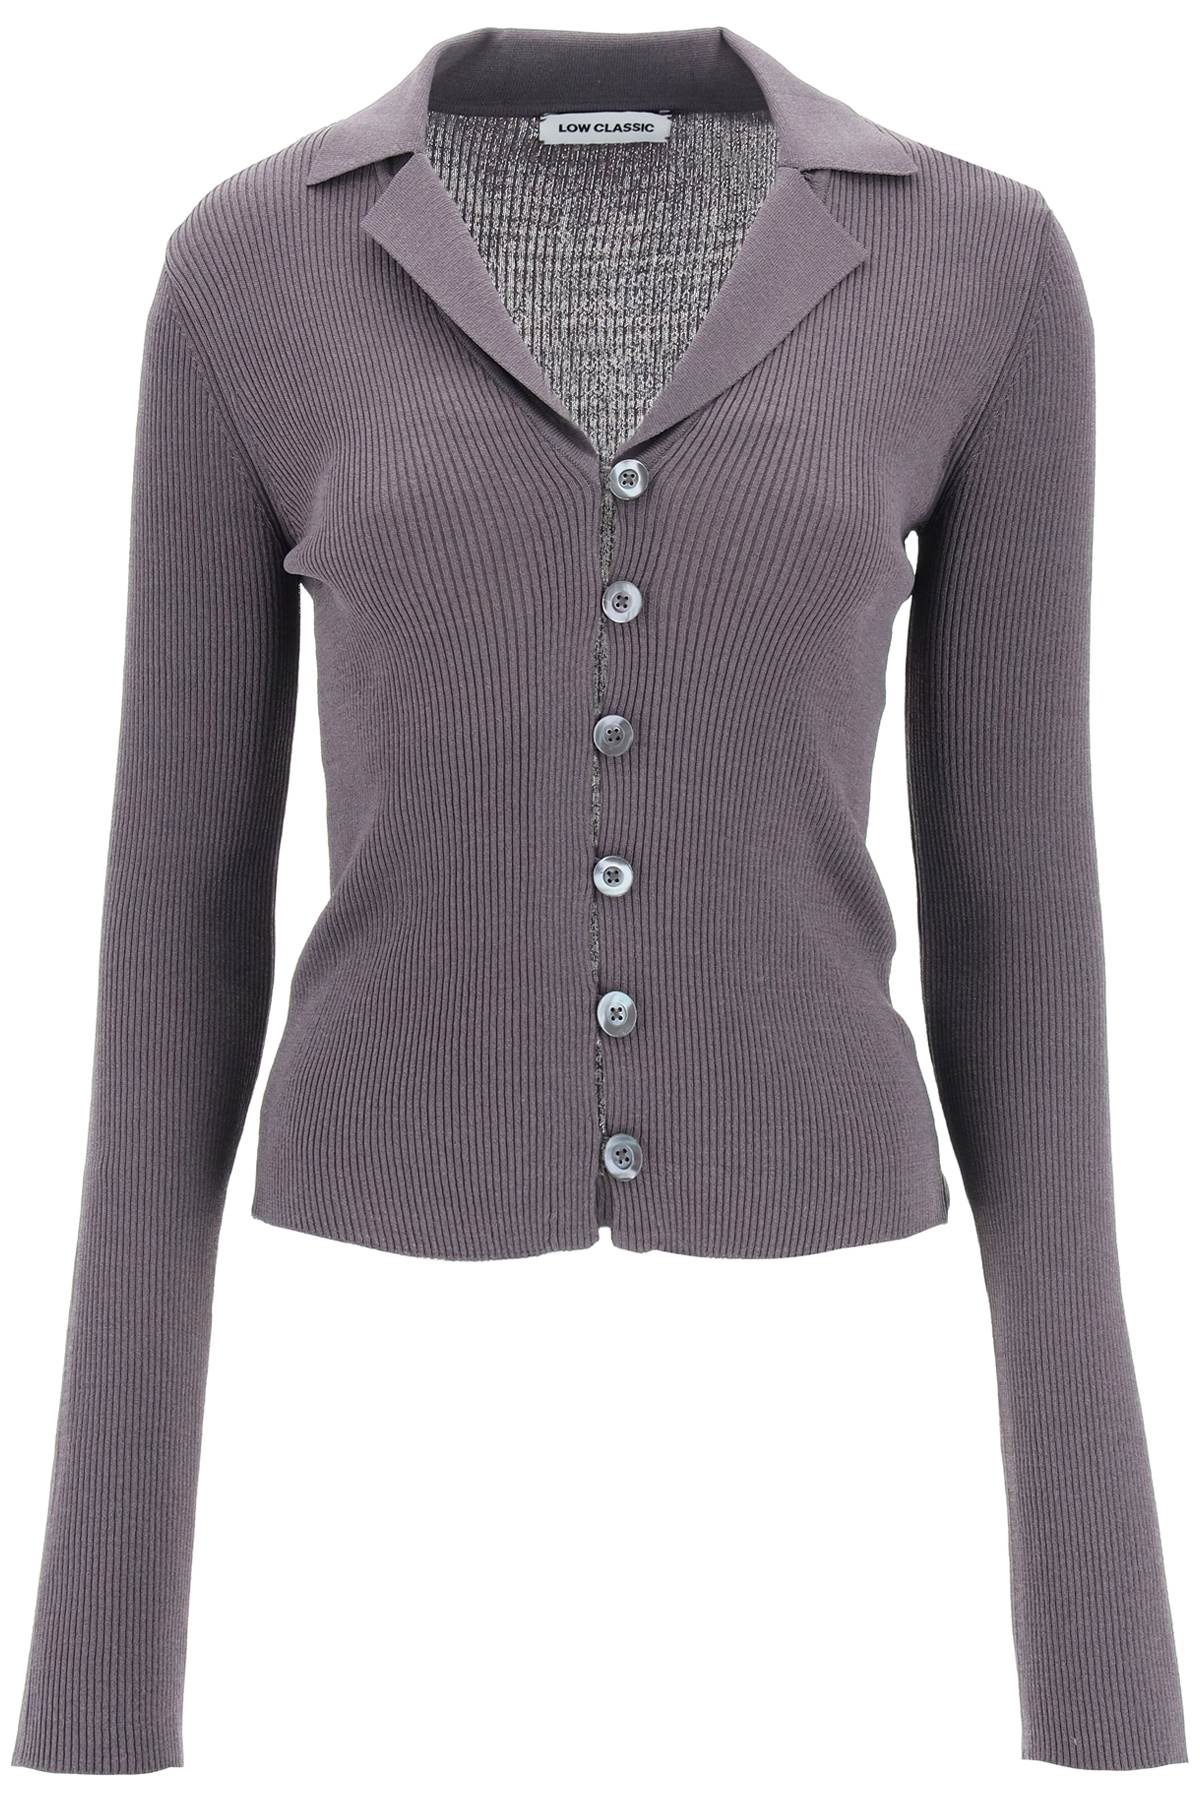 LOW CLASSIC KNIT CARDIGAN WITH COLLAR